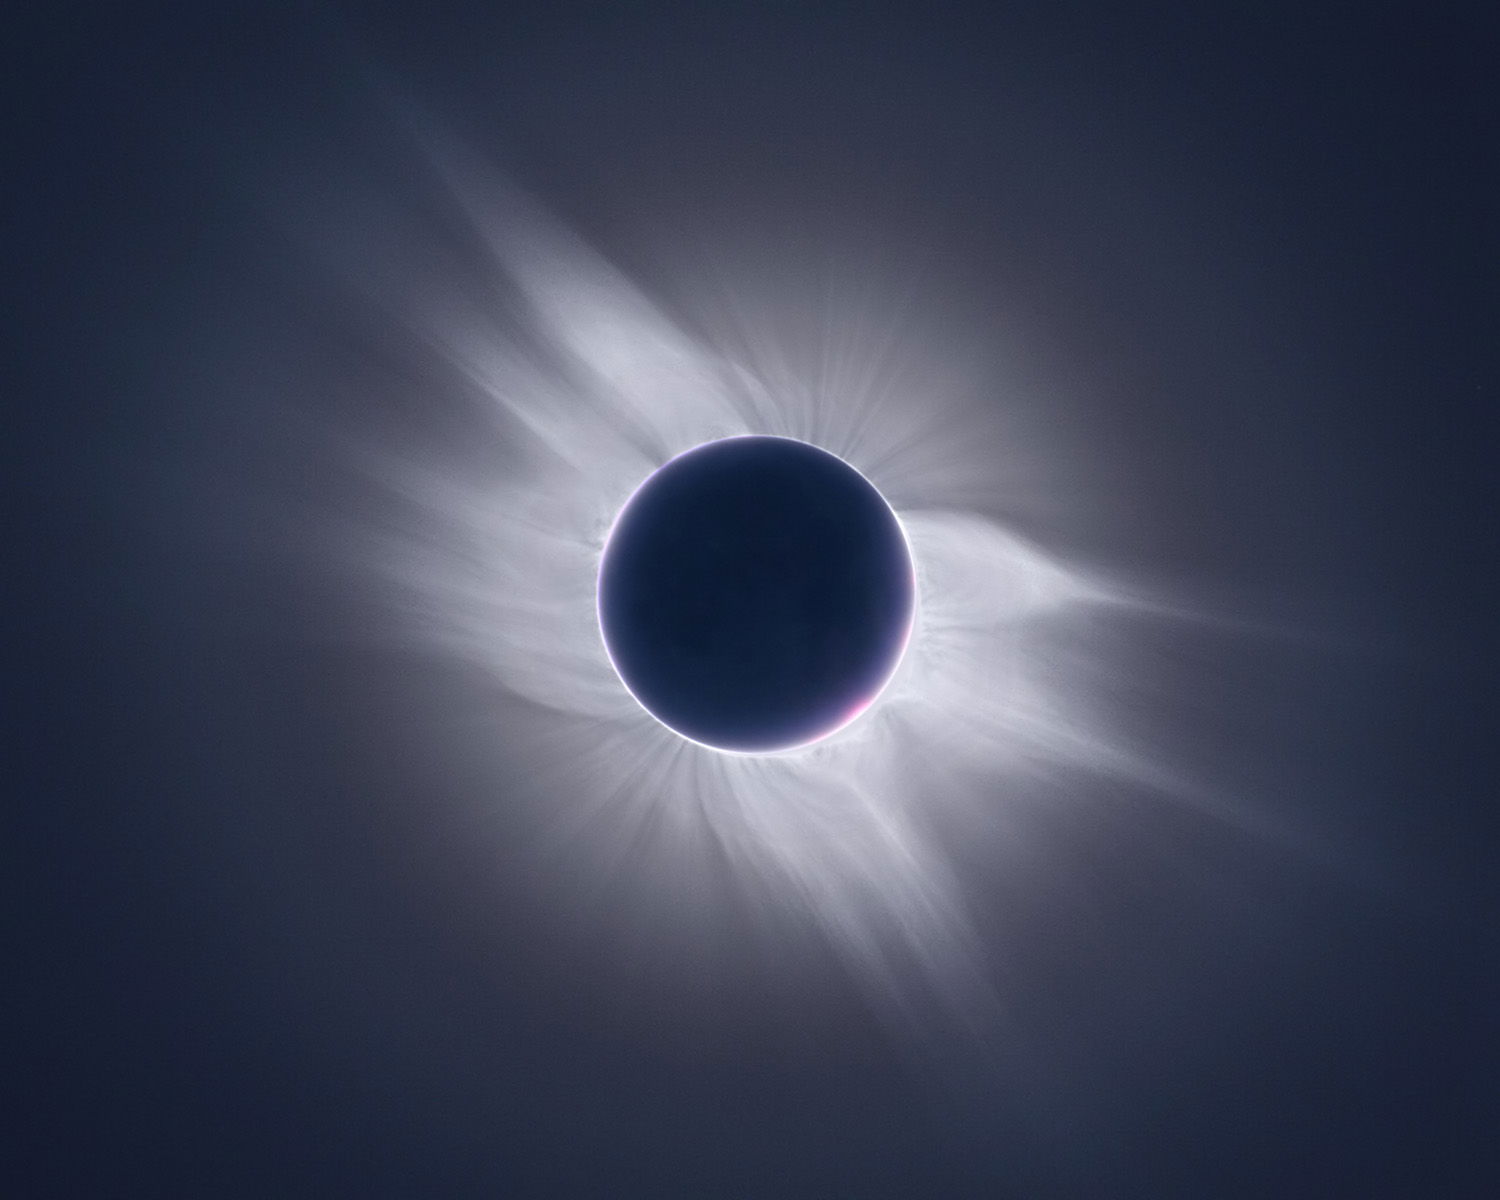 TOTAL SOLAR ECLIPSE OF 2006 MARCH 29